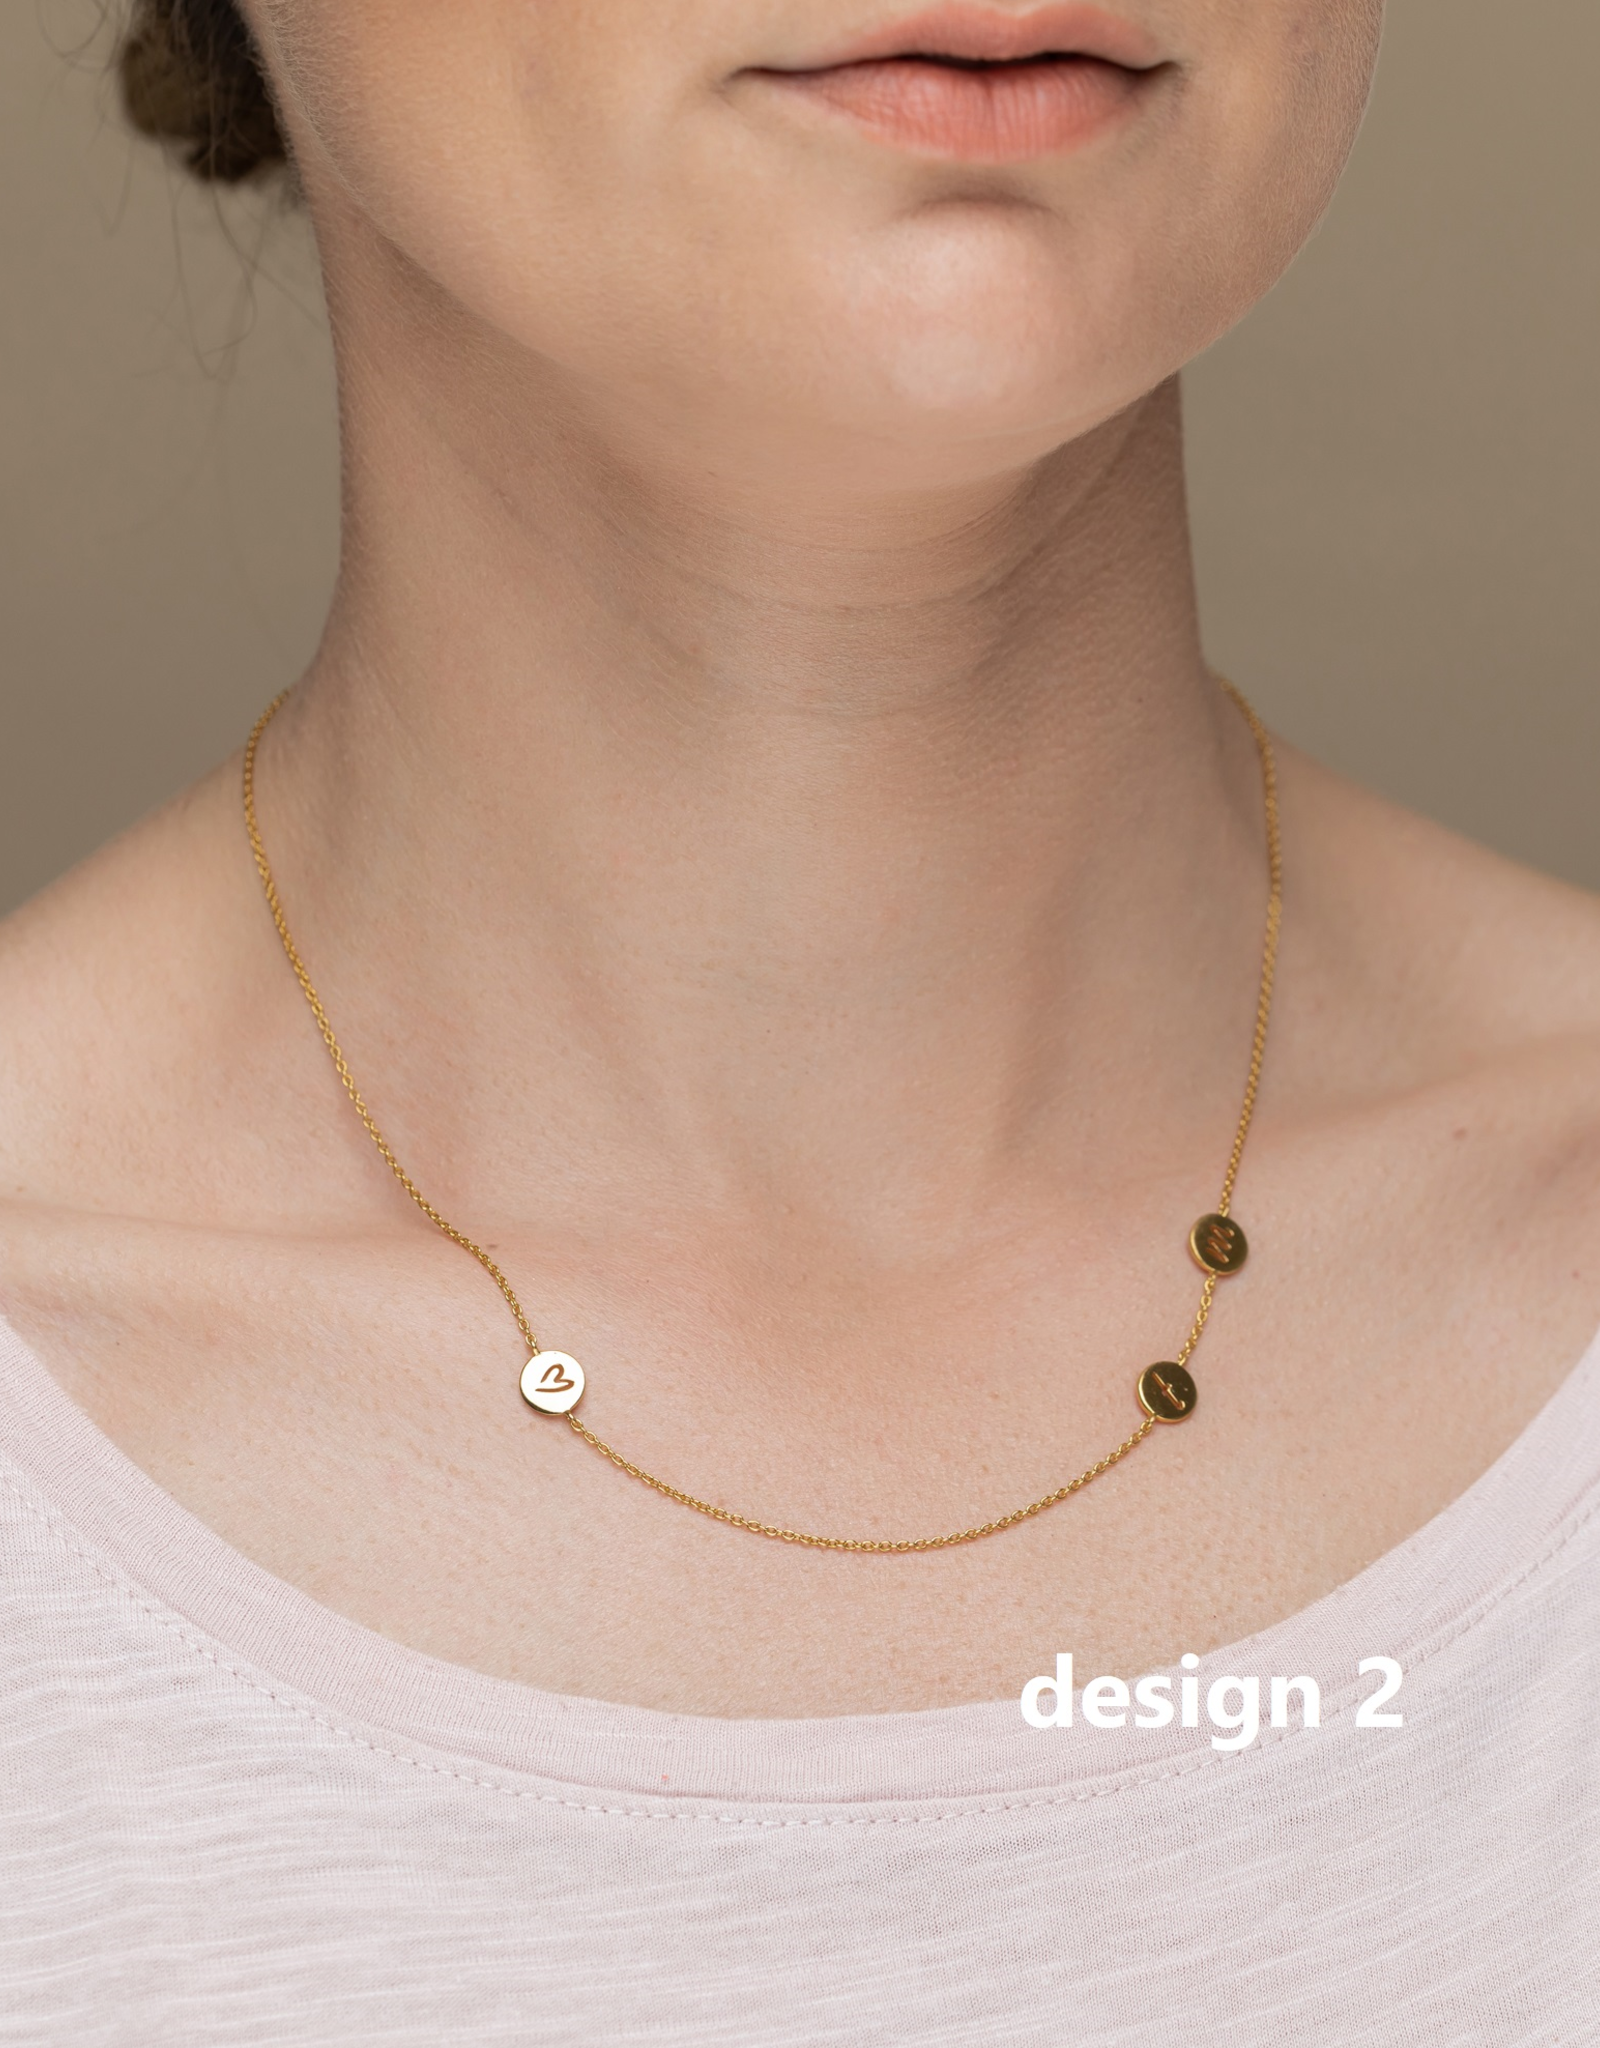 Design your necklace with 3 charms